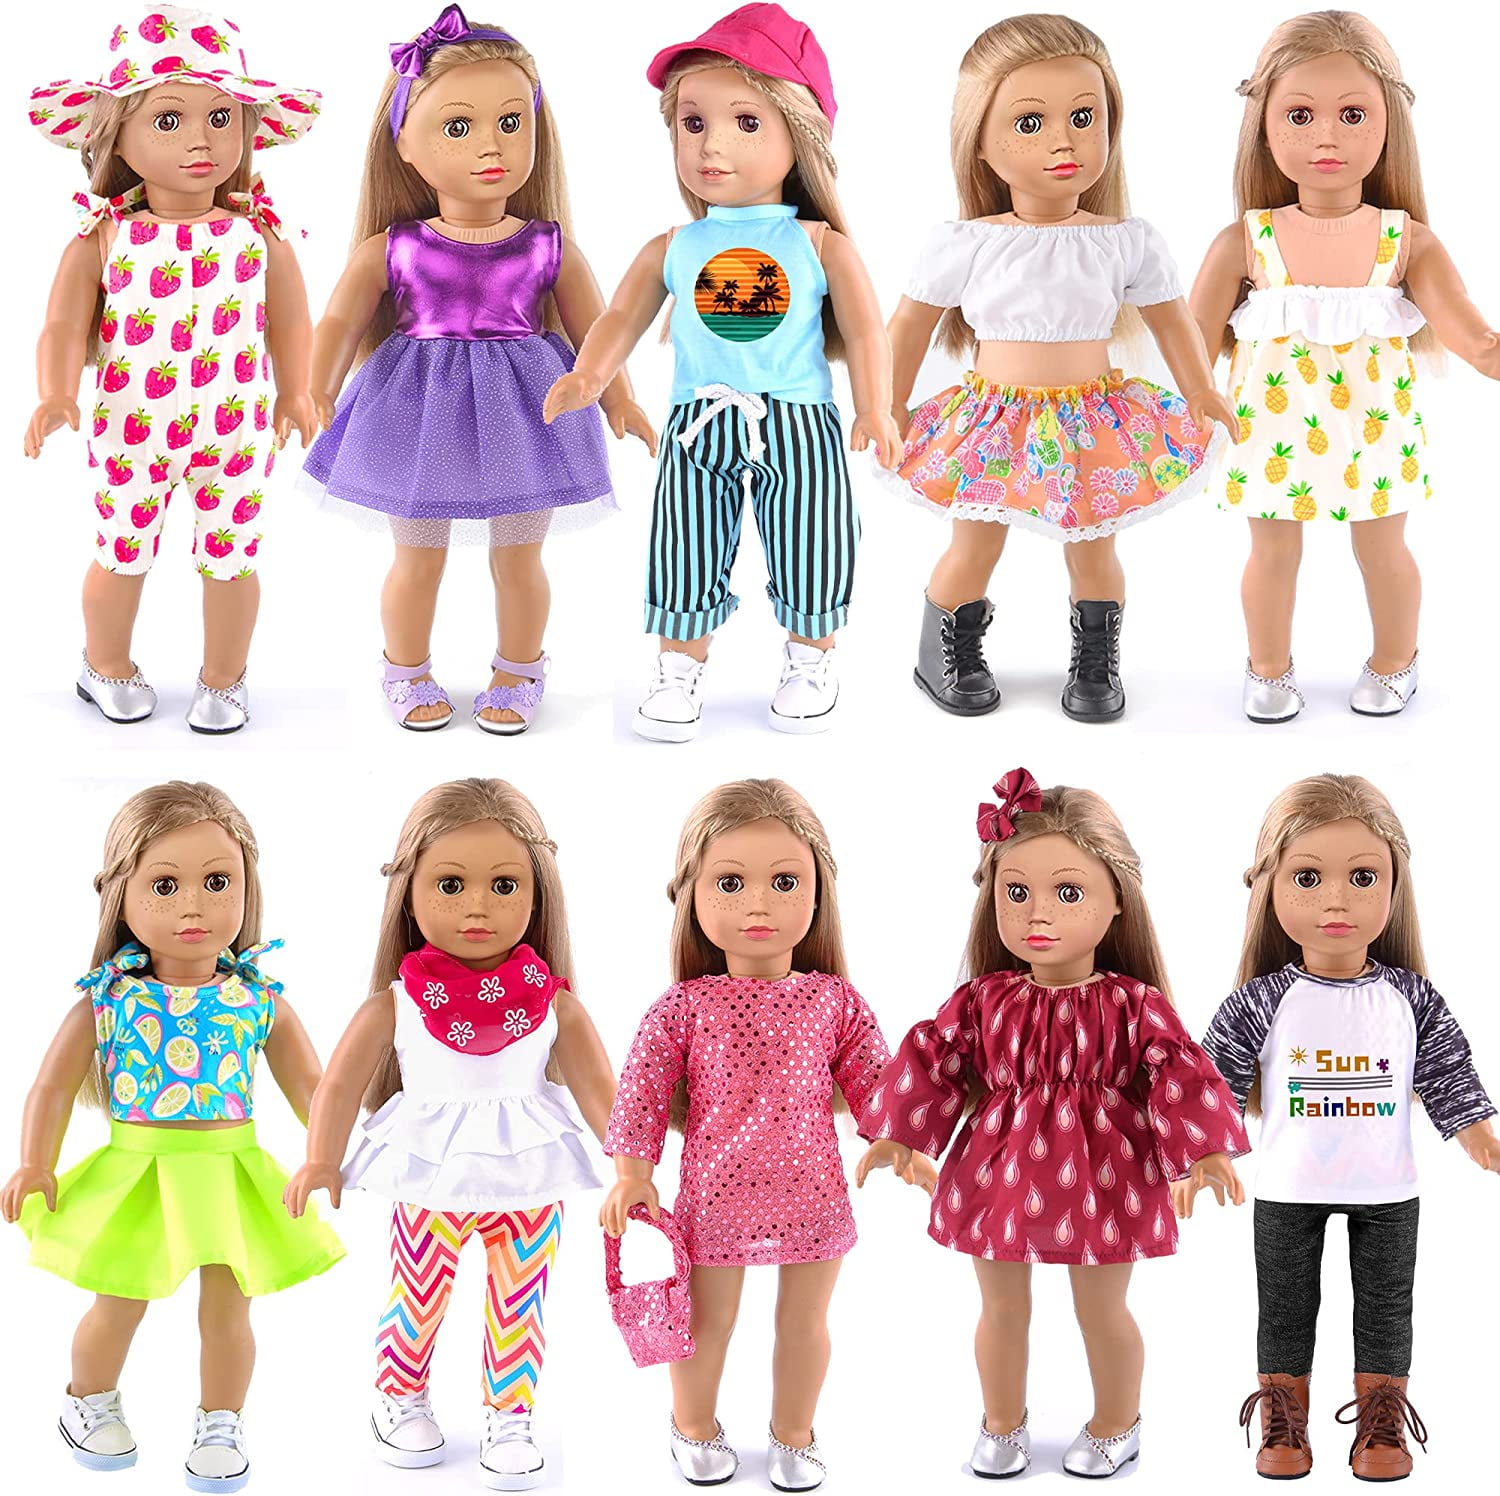  MSYO 18-Inch Doll Clothes and Accessories,10 Sets Cute